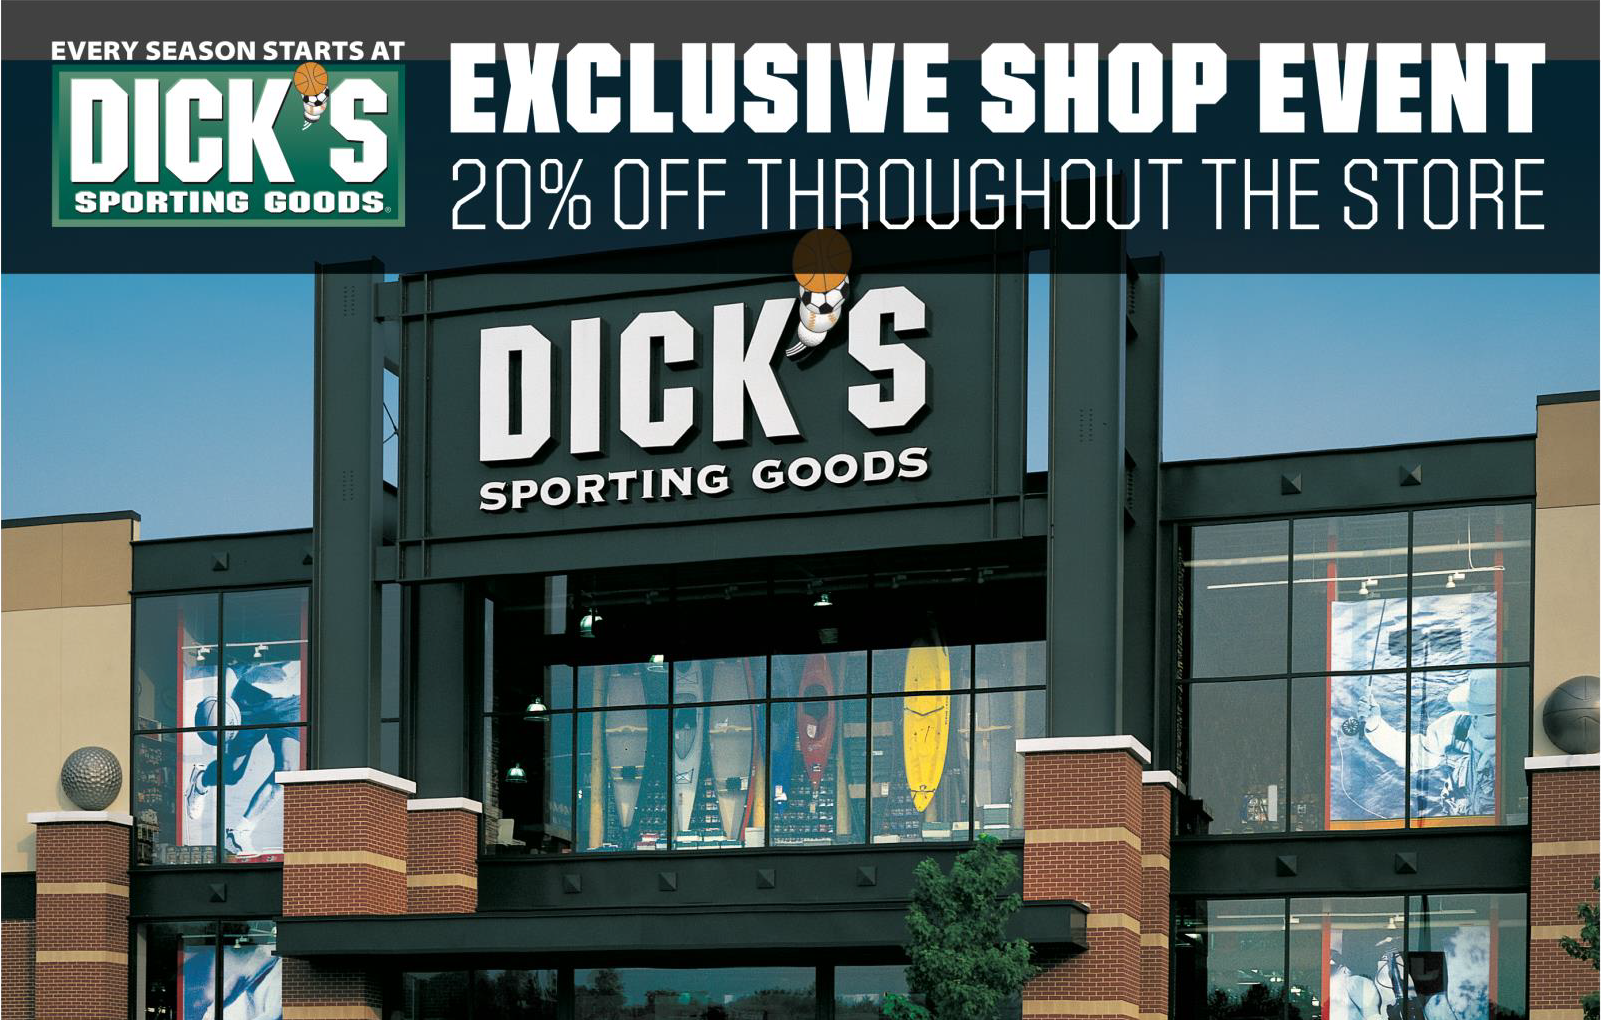 Are big 5 and dicks sporting goods the same company